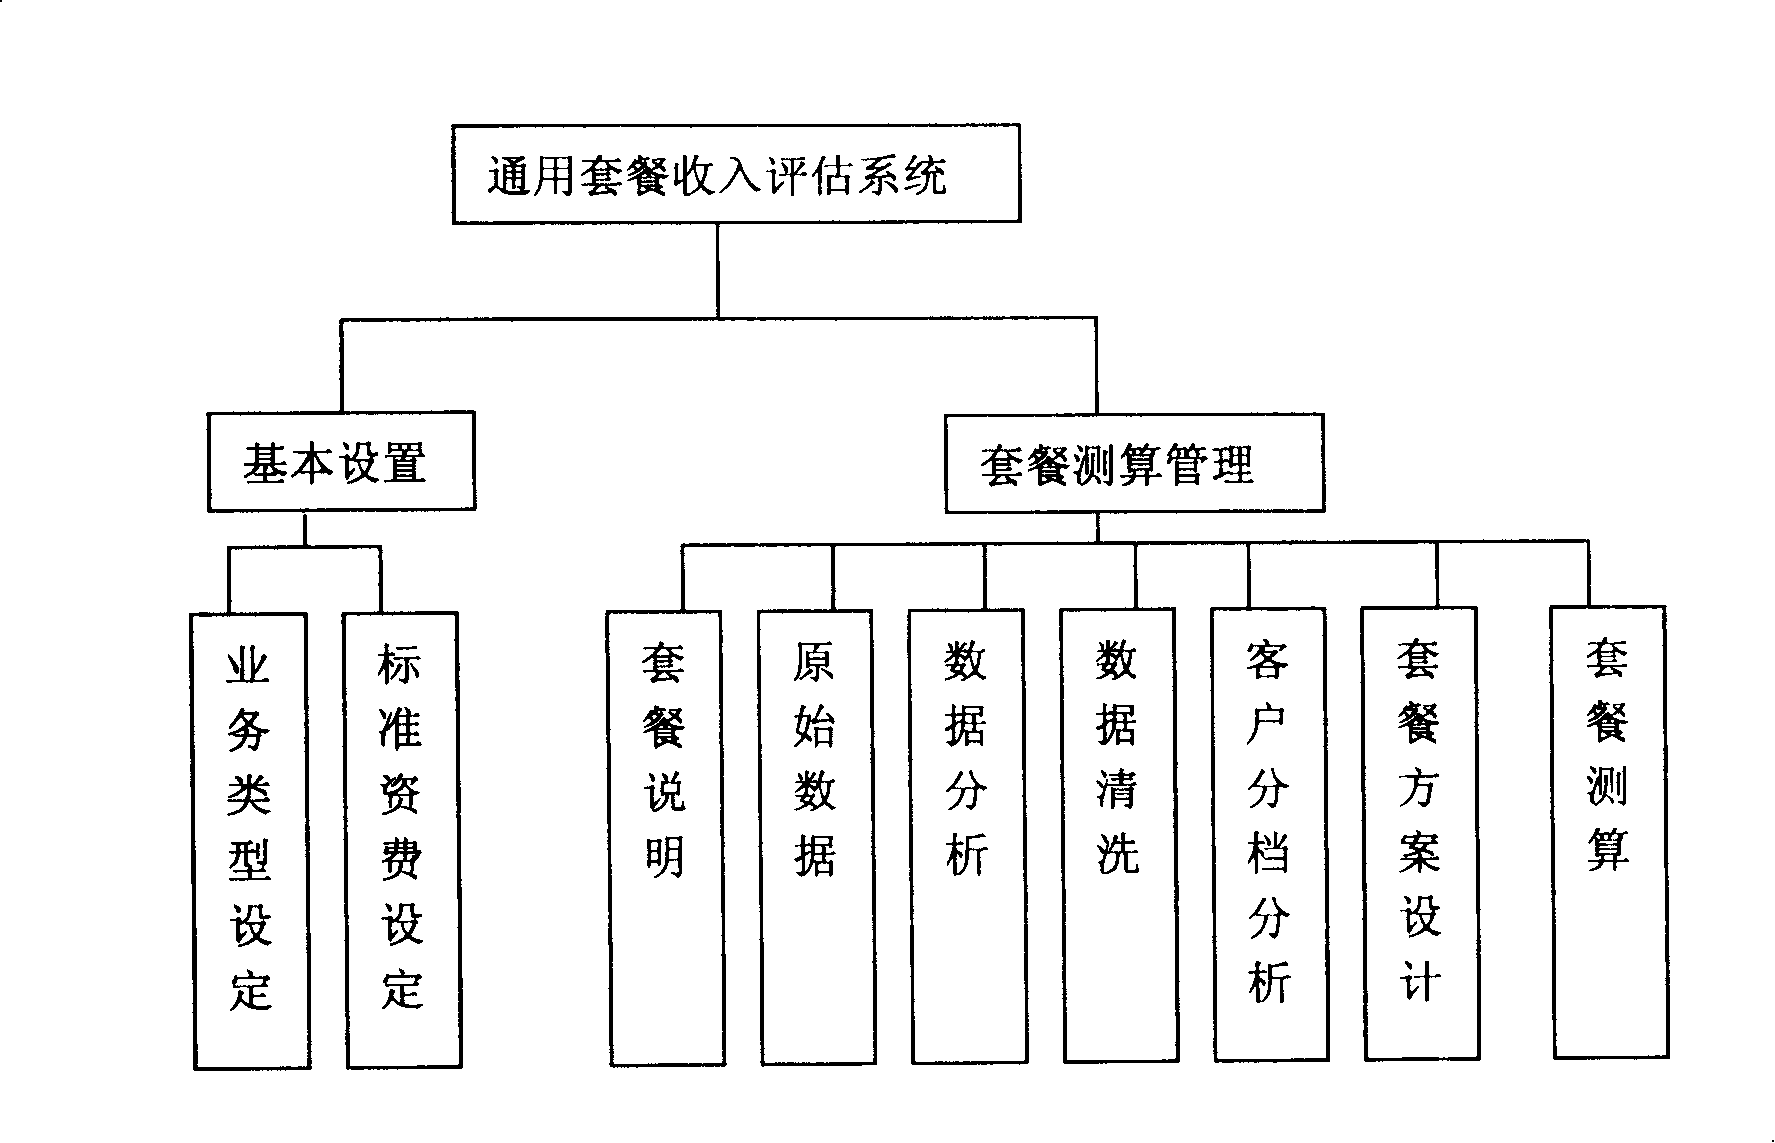 Method for estimating client level set-meal incomings and correlate system